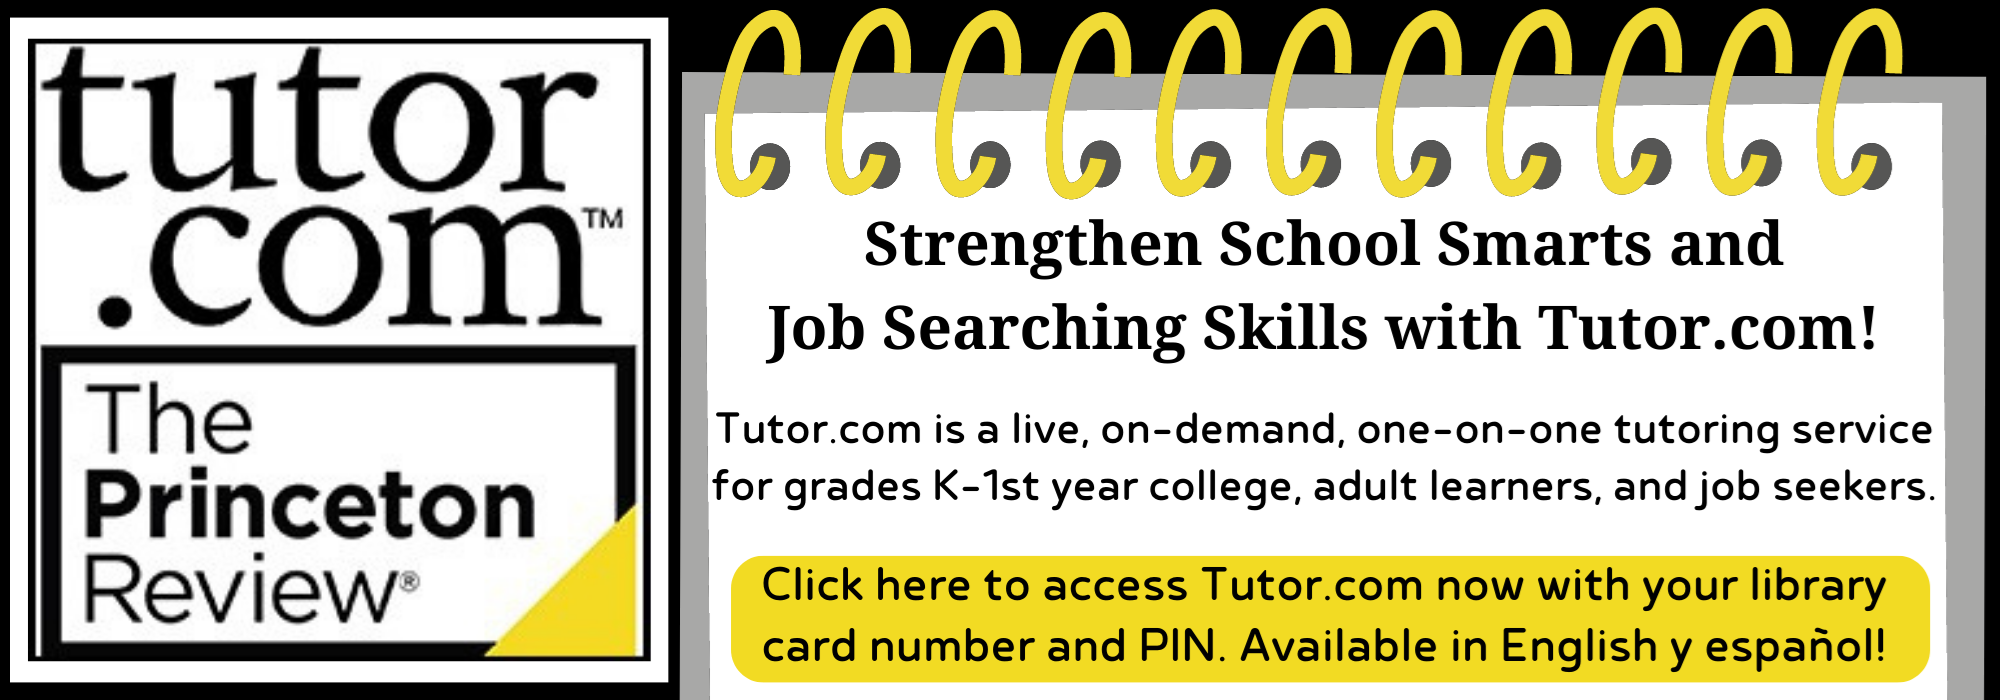 Strengthen School Smarts and Job Searching Skills with Tutor.com! Click here to access Tutor.com now with your library card number and PIN.